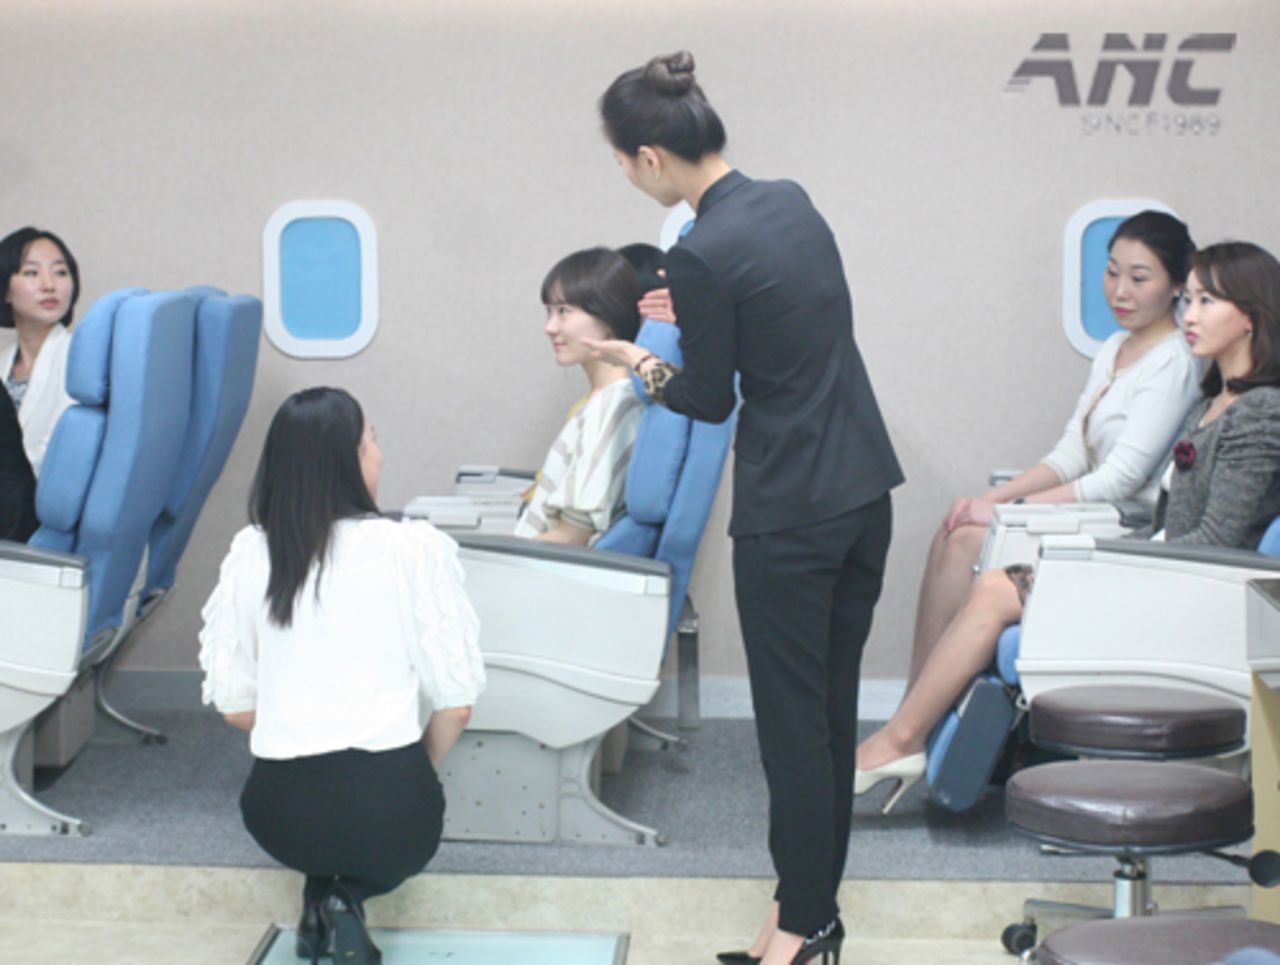 At the ANC flight attendant academy in Seoul, South Korea, students role play in a classroom simulating a plane. 